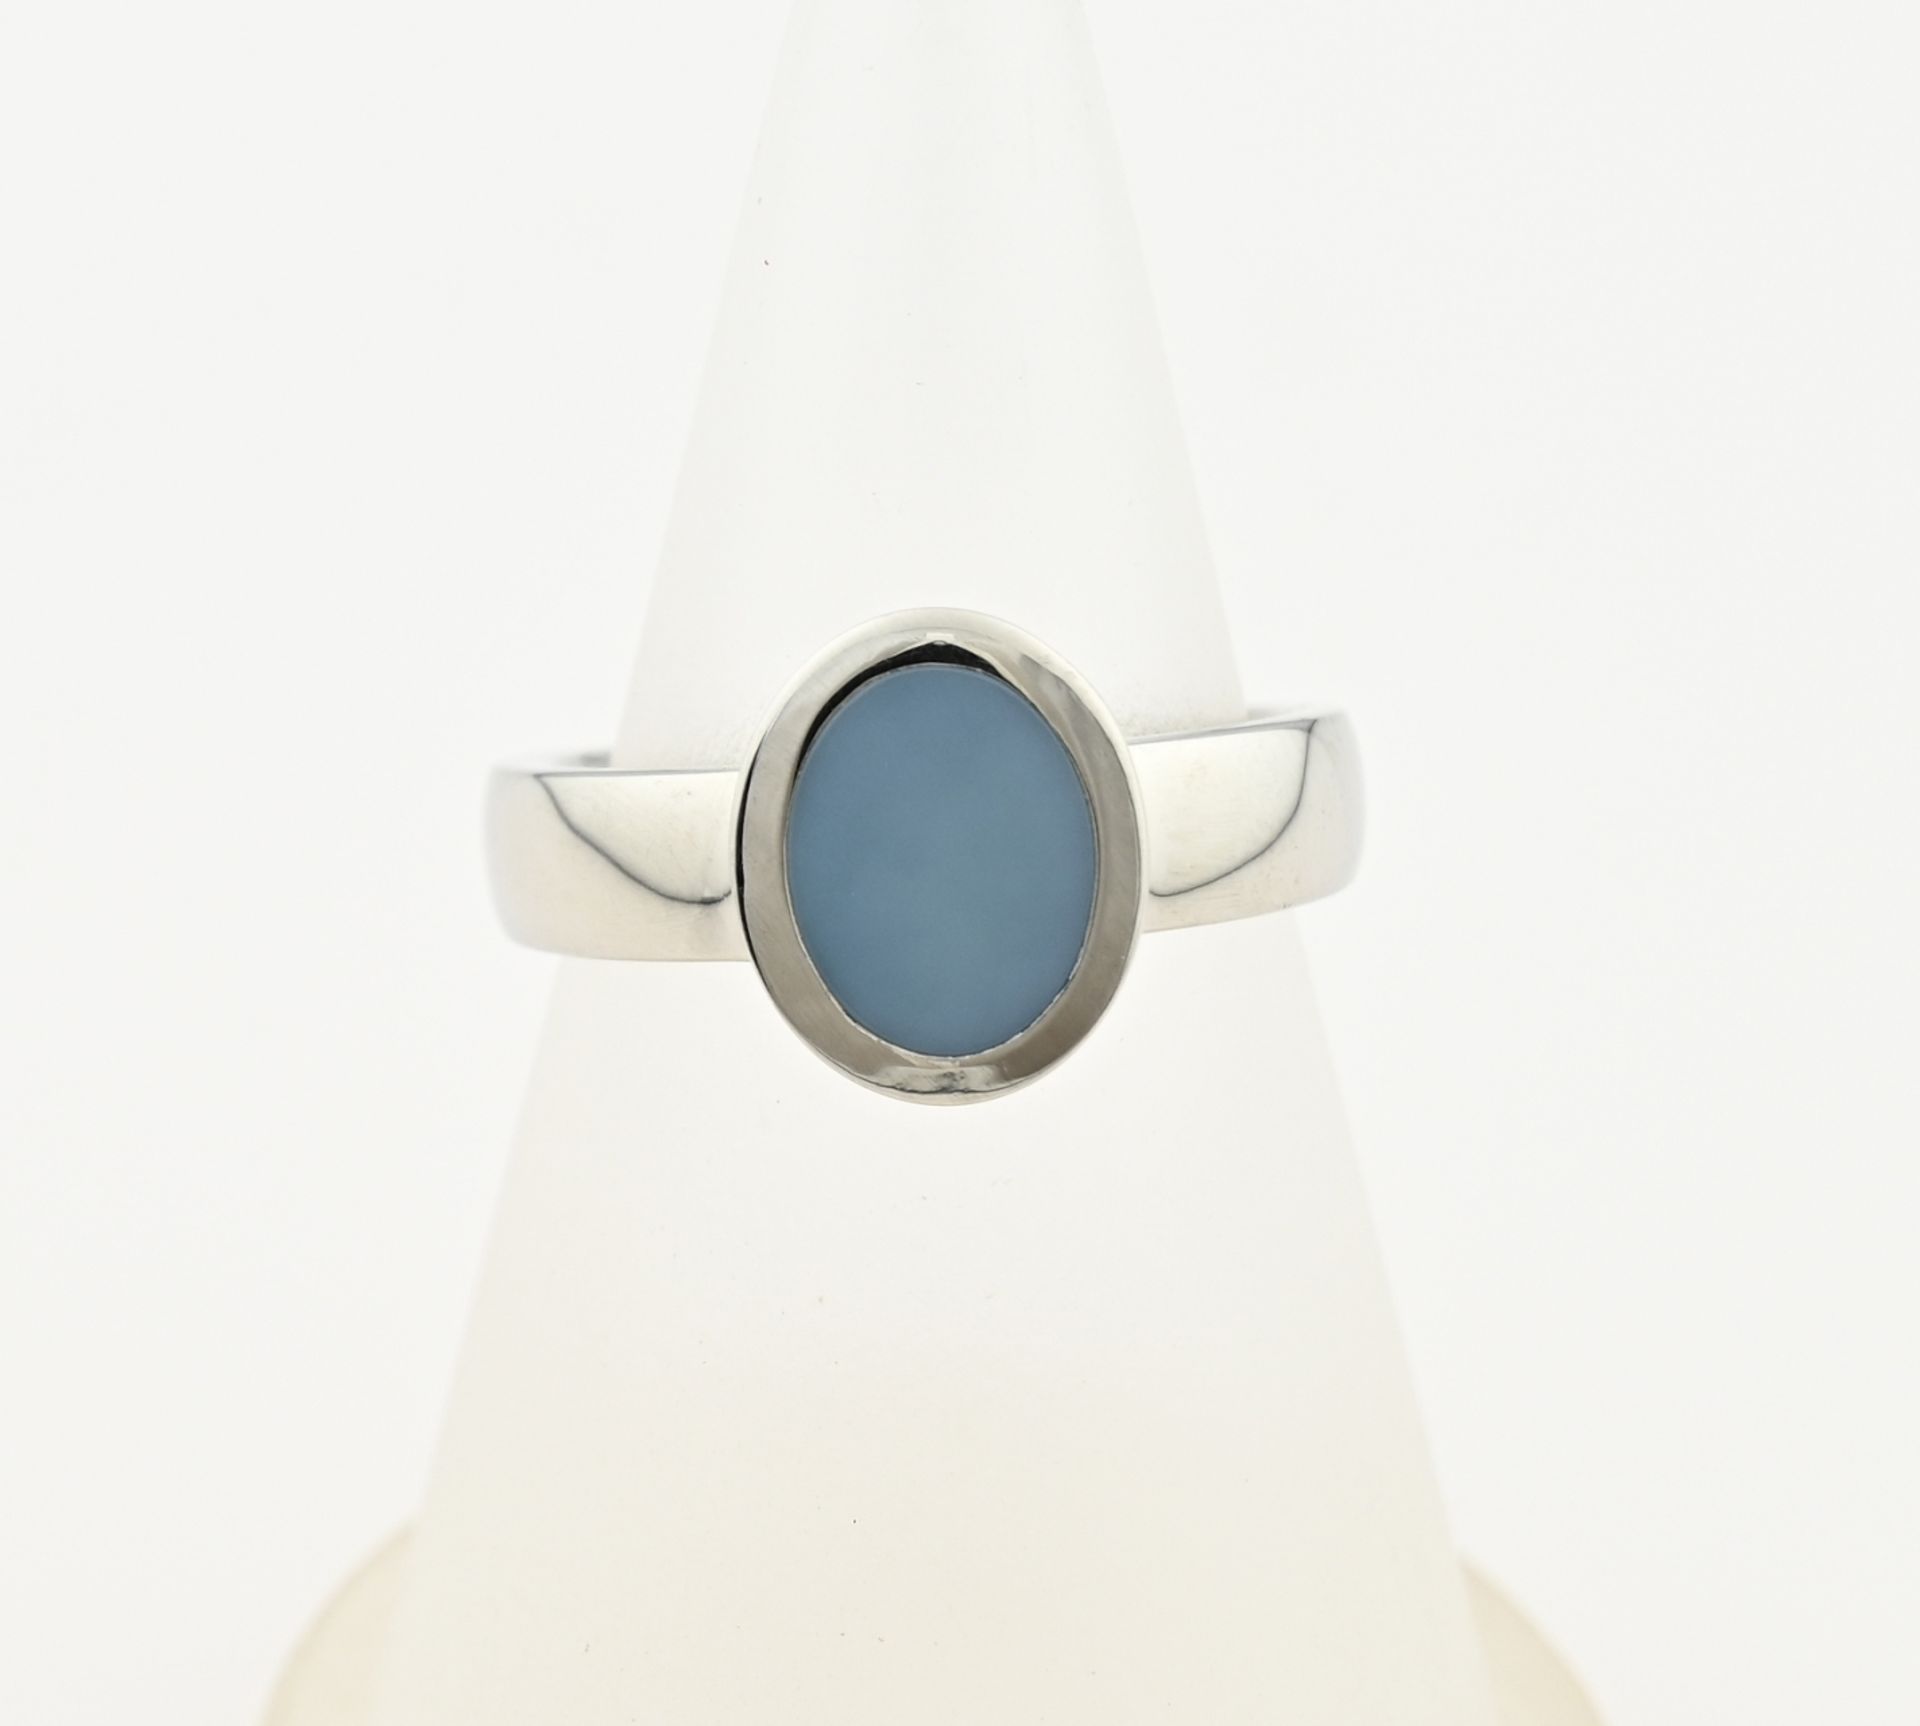 Platinum ring with blue layer stone